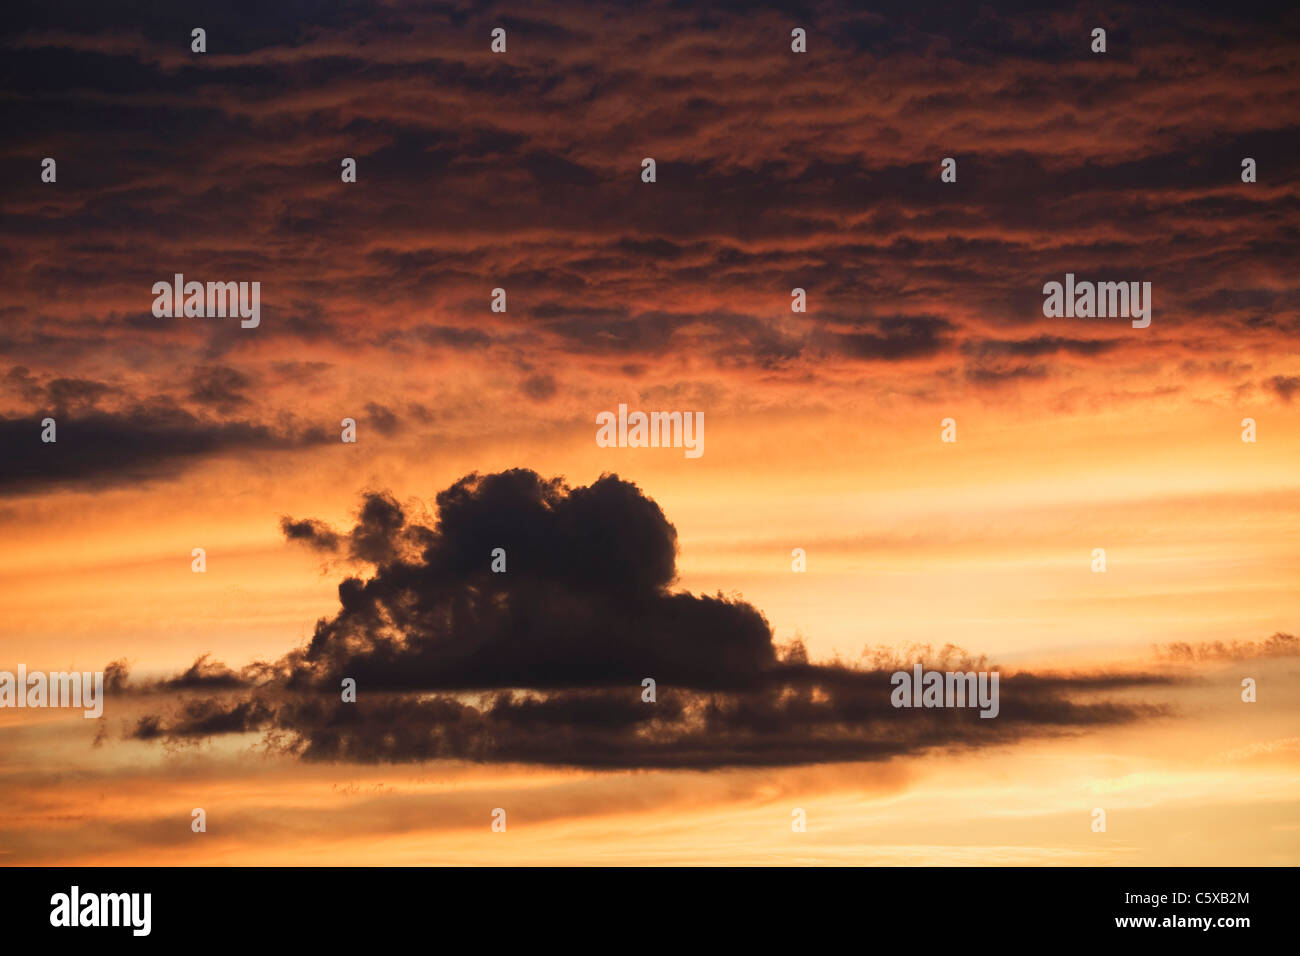 Austria, Cloudy sky with afterglow Stock Photo